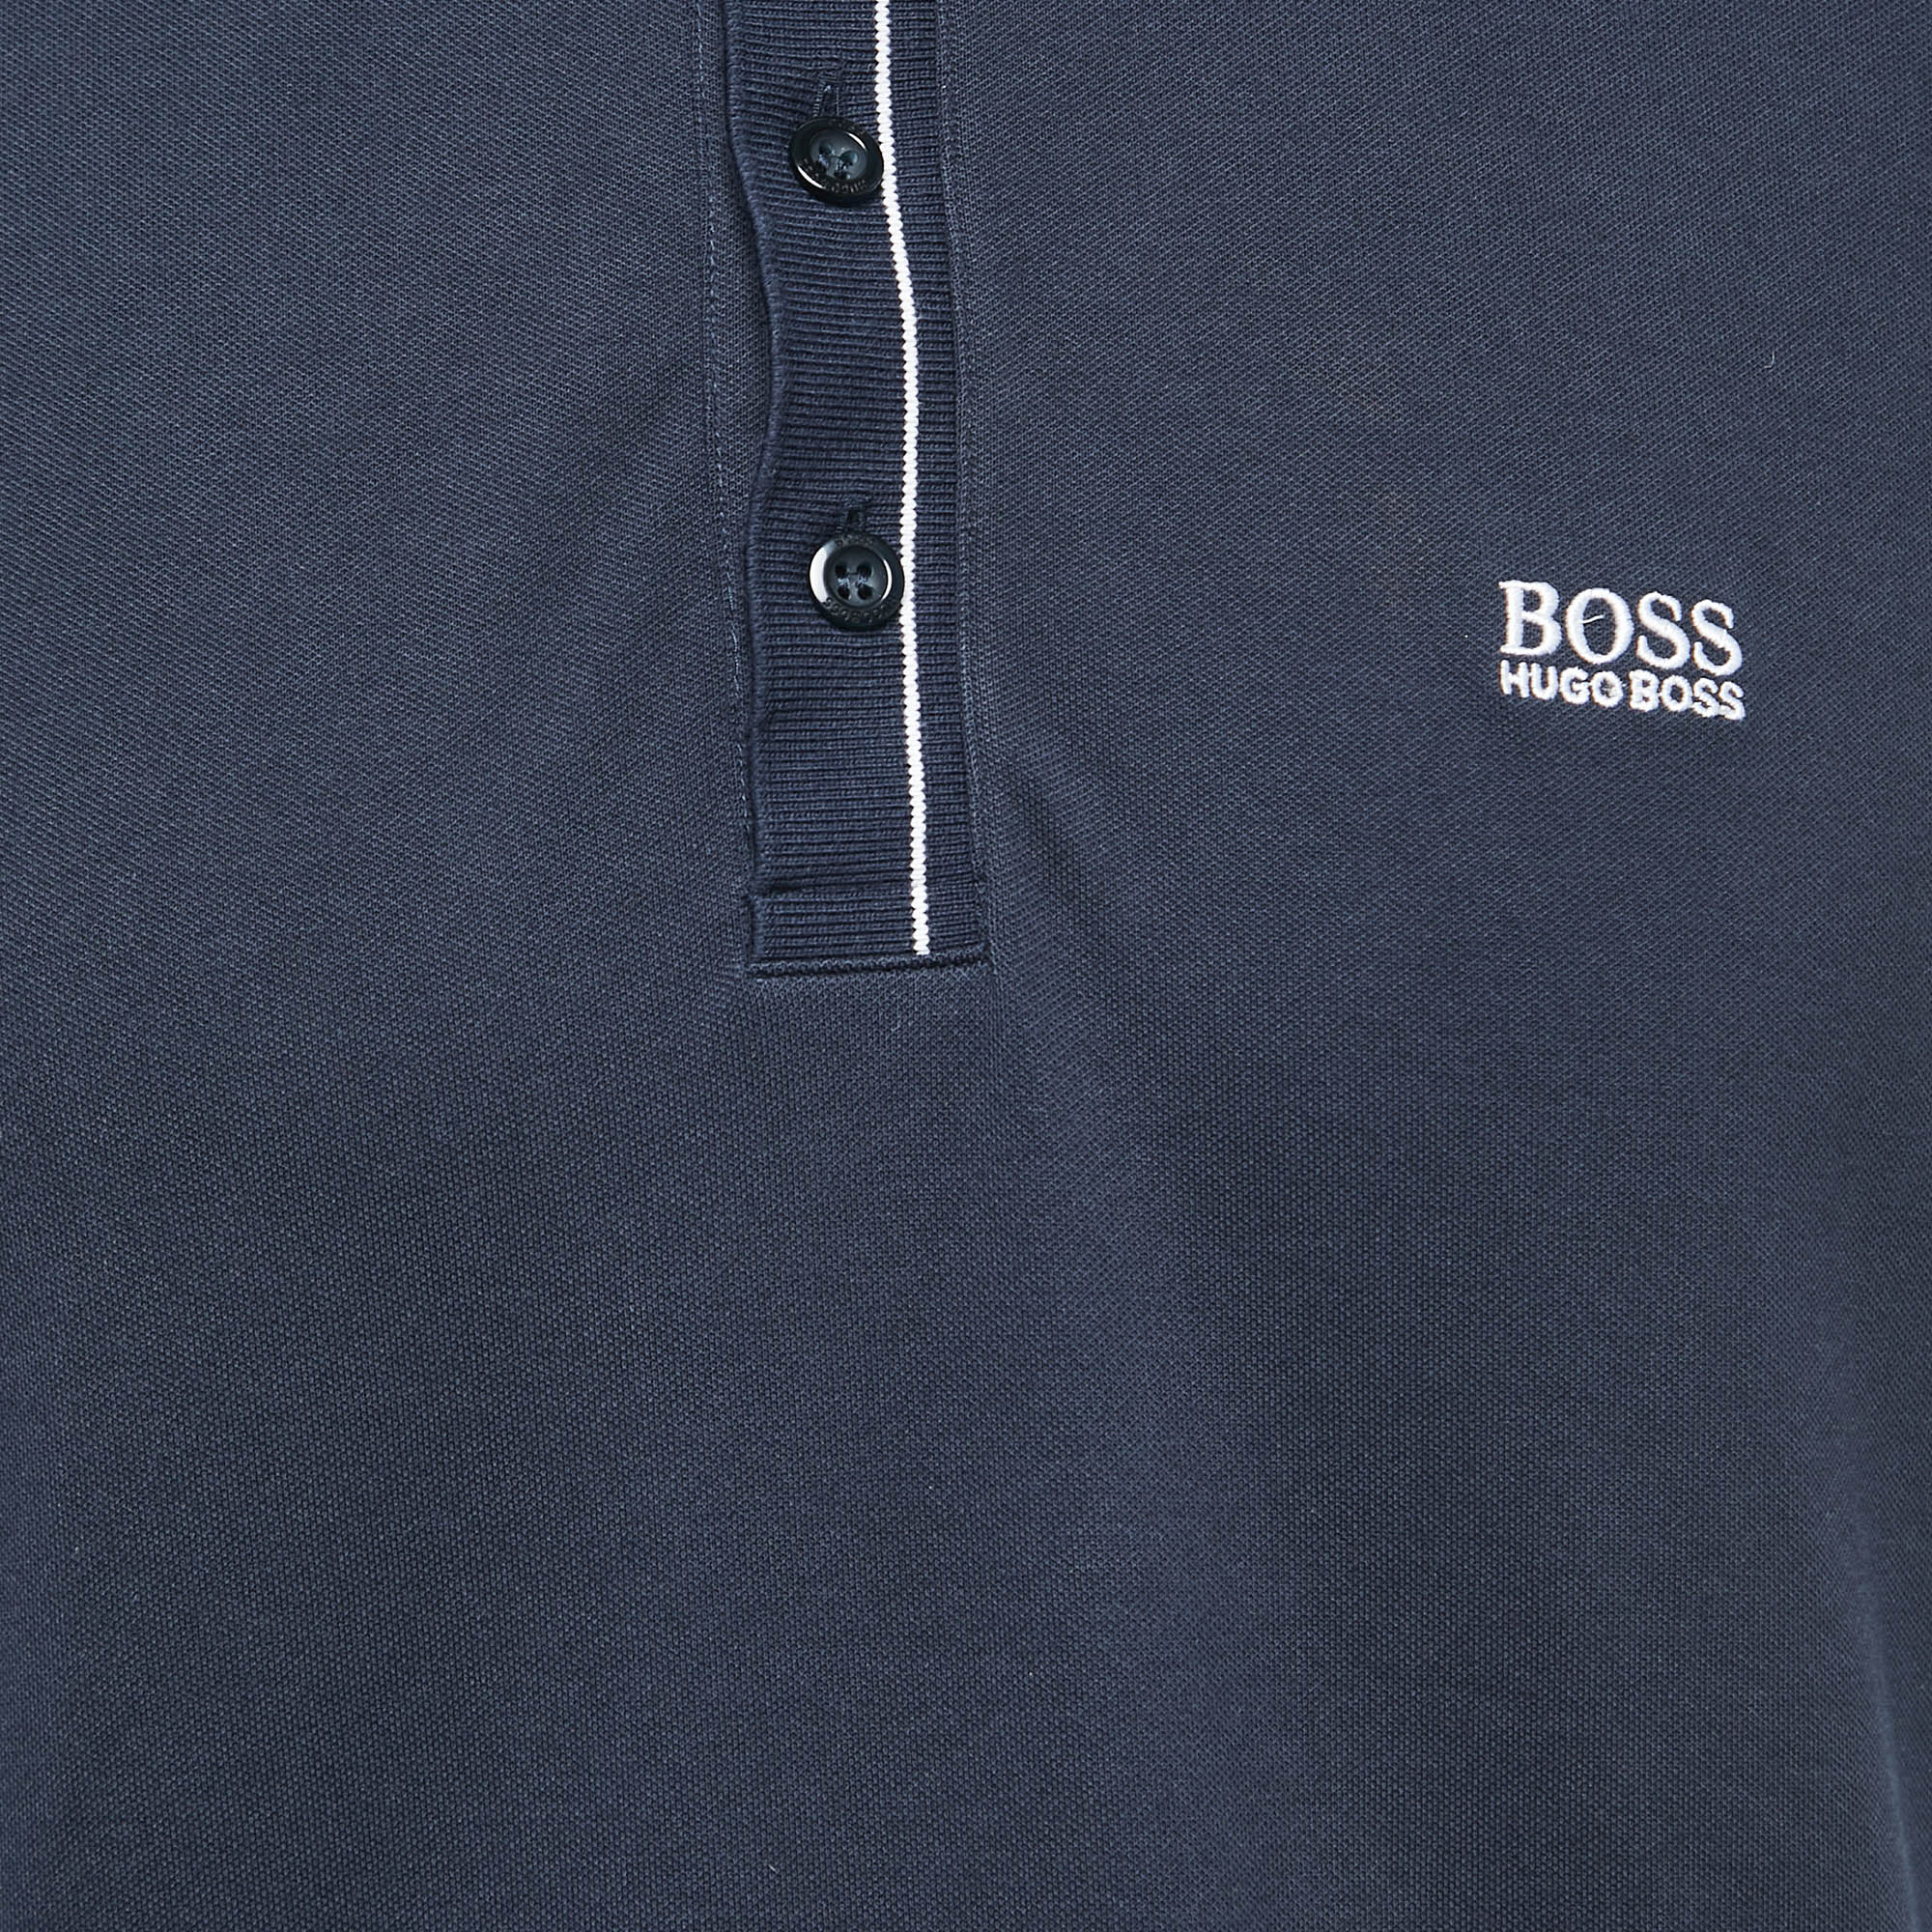 Boss By Hugo Boss Navy Blue Cotton Pique Moisture Manager Slim Fit Polo T-Shirt L